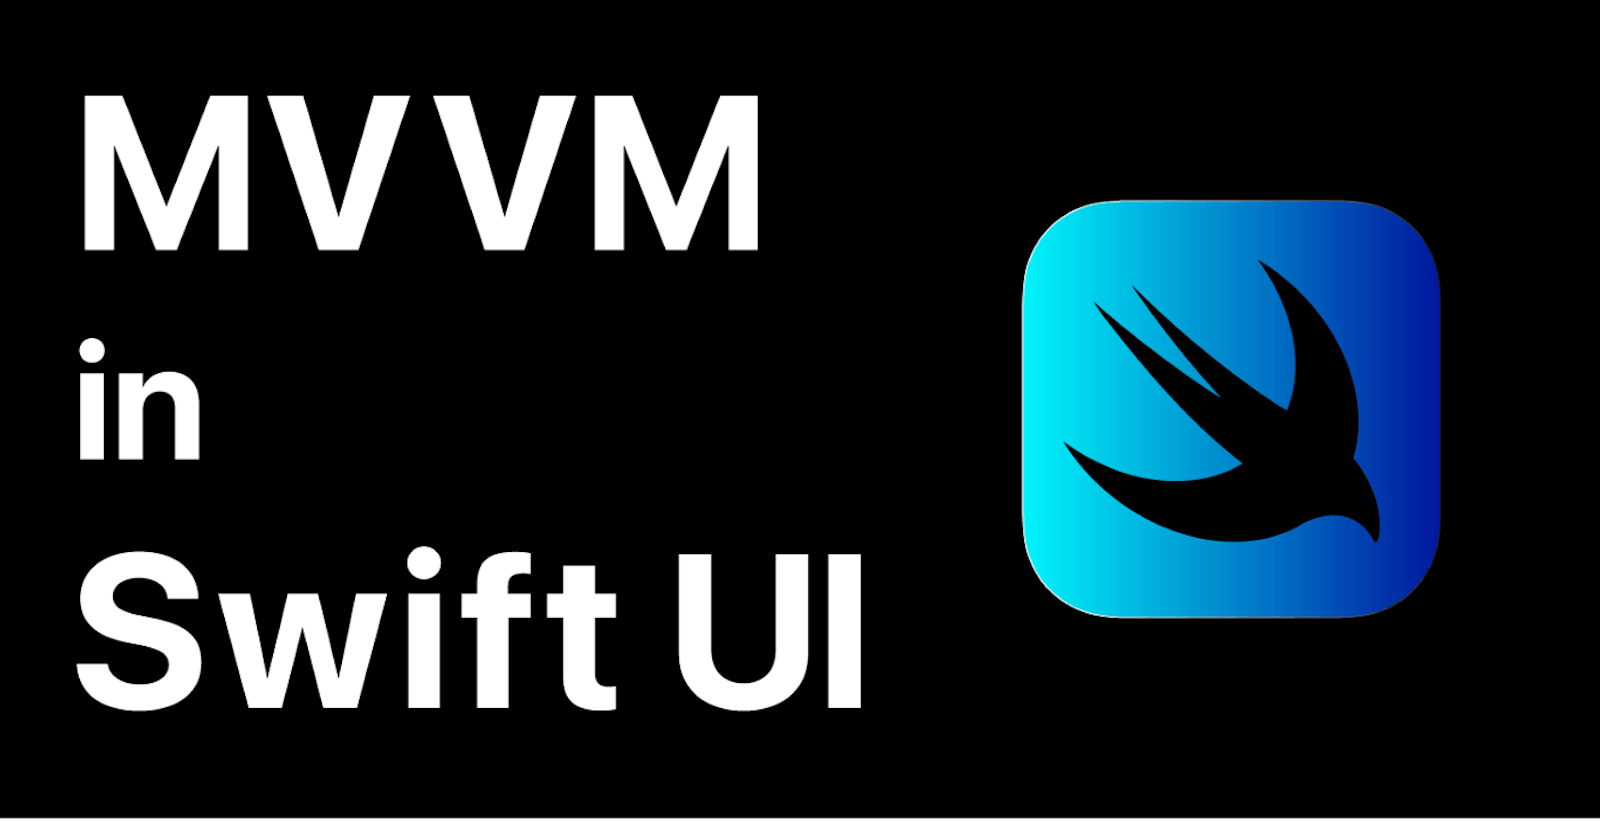 MVVM misfit with SwiftUI